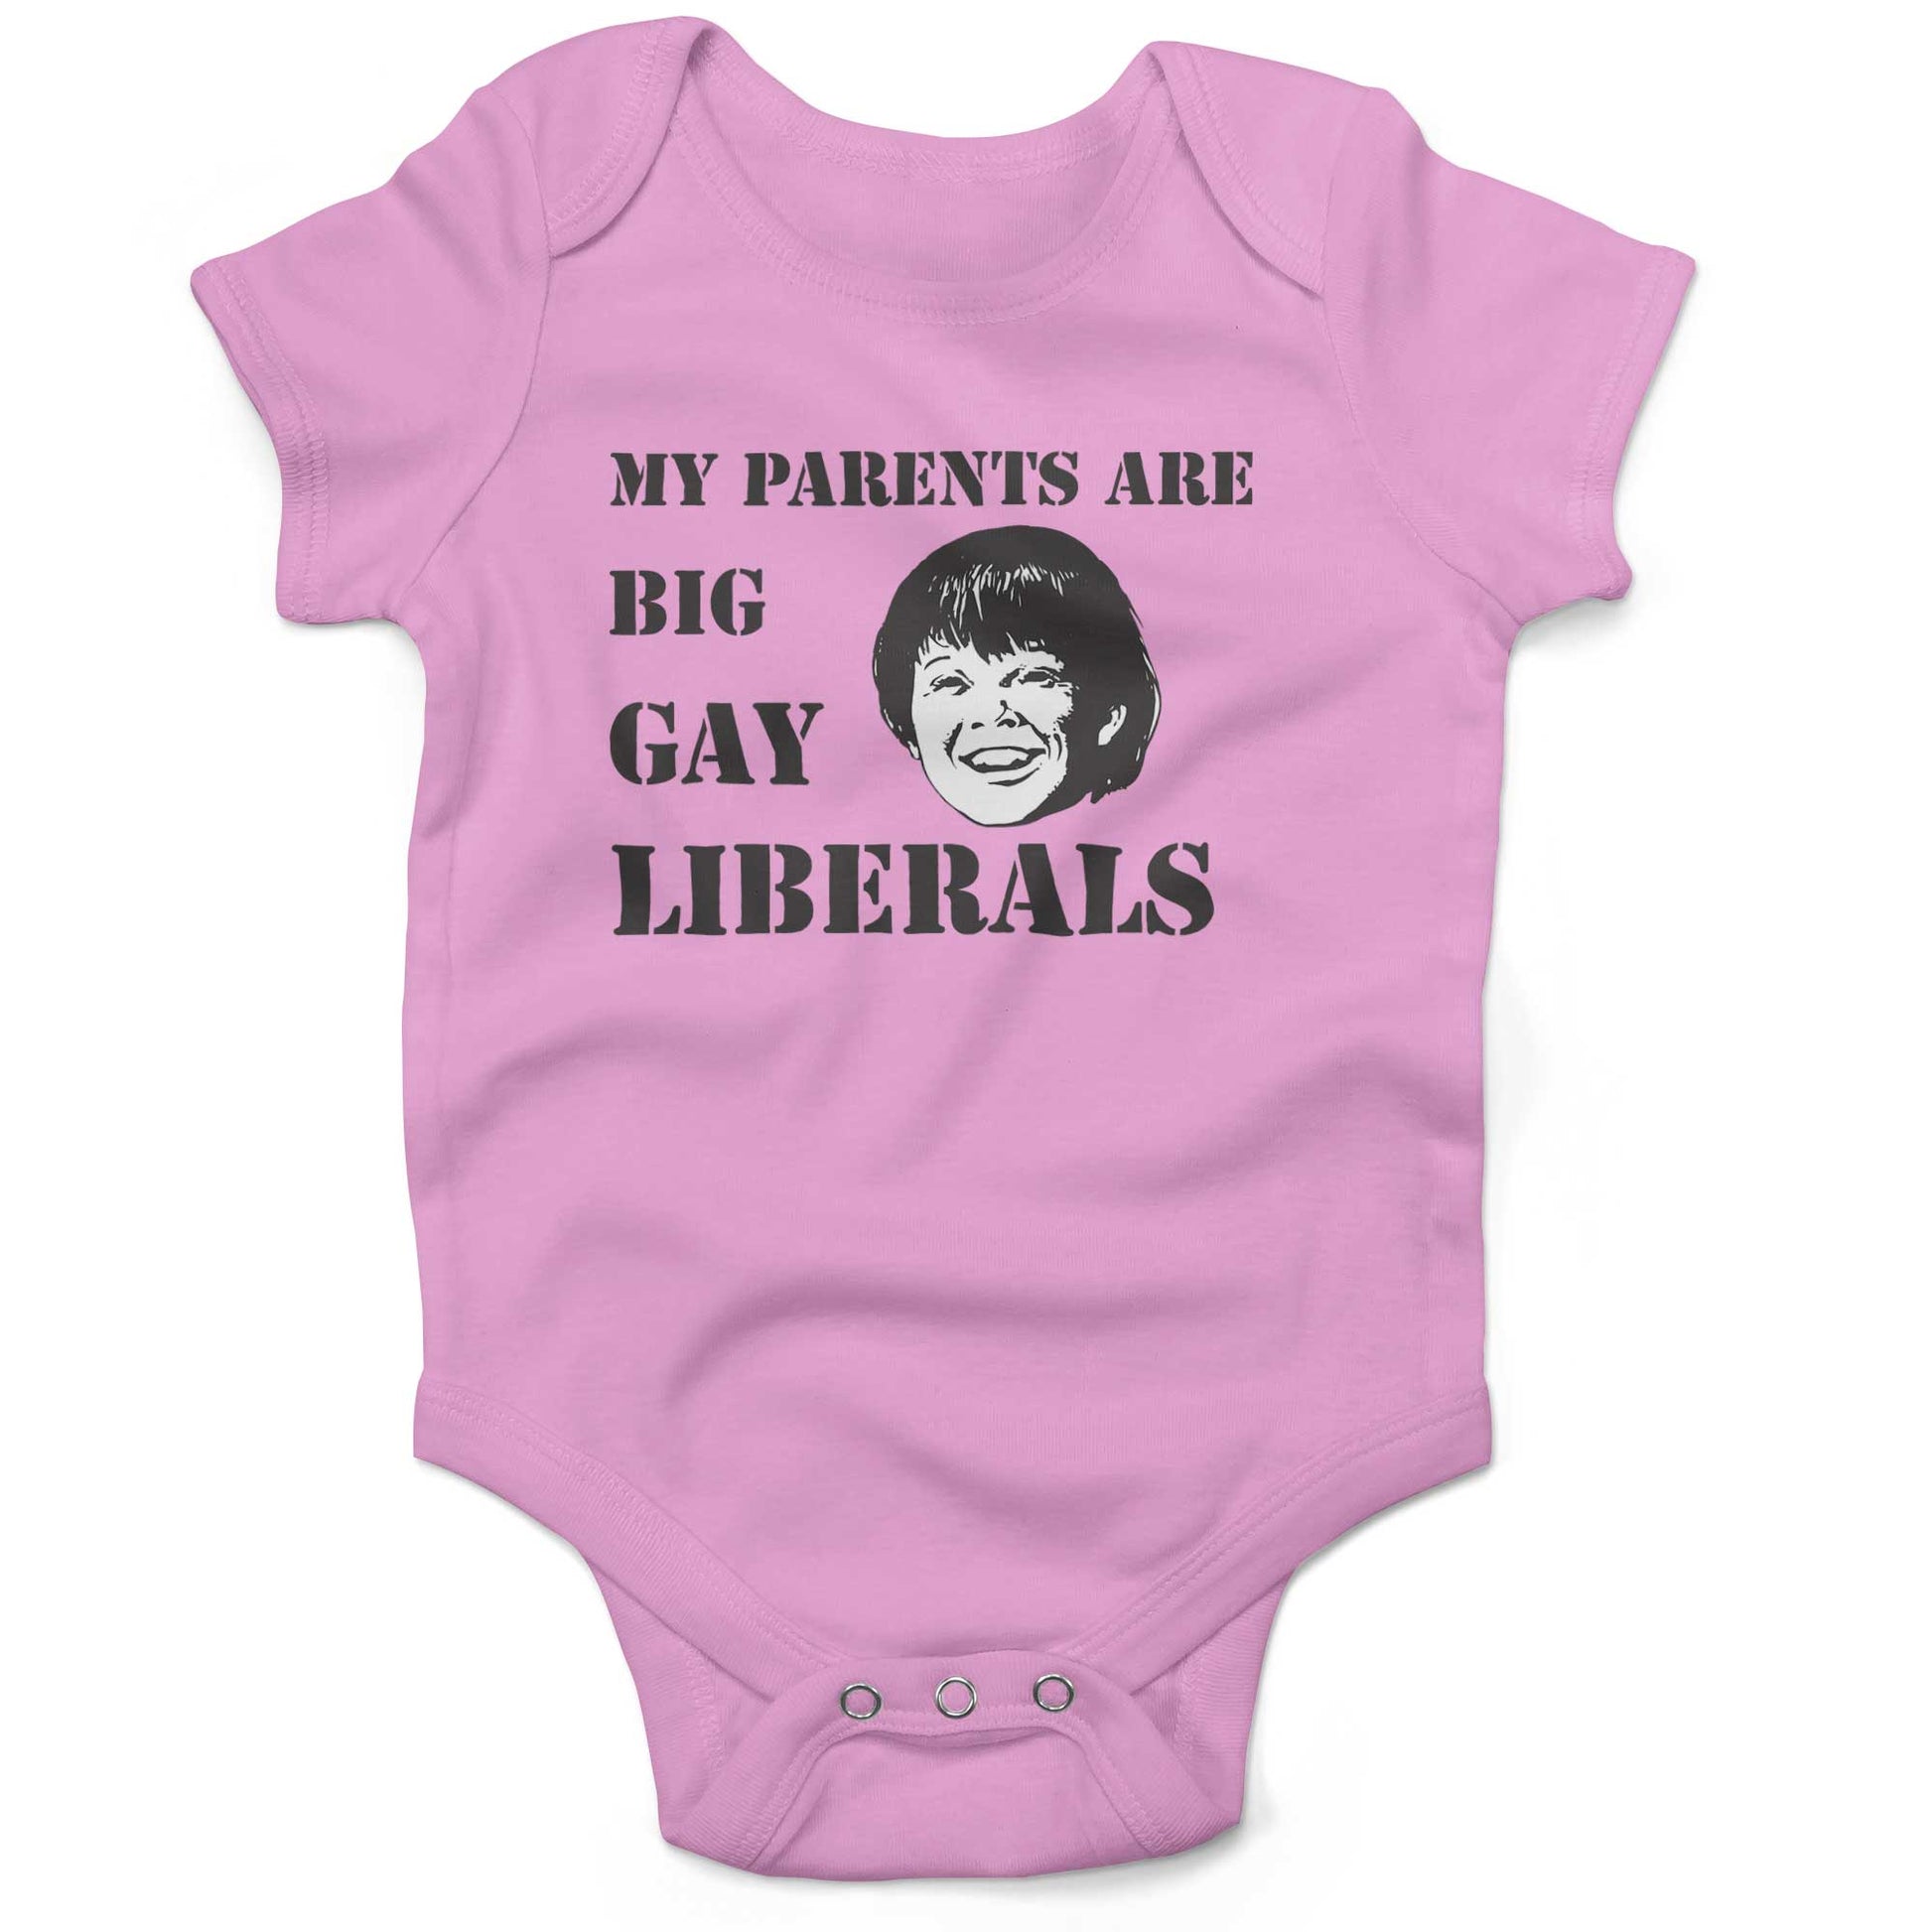 My Parents Are Big, Gay Liberals Infant Bodysuit or Raglan Baby Tee-Organic Pink-3-6 months